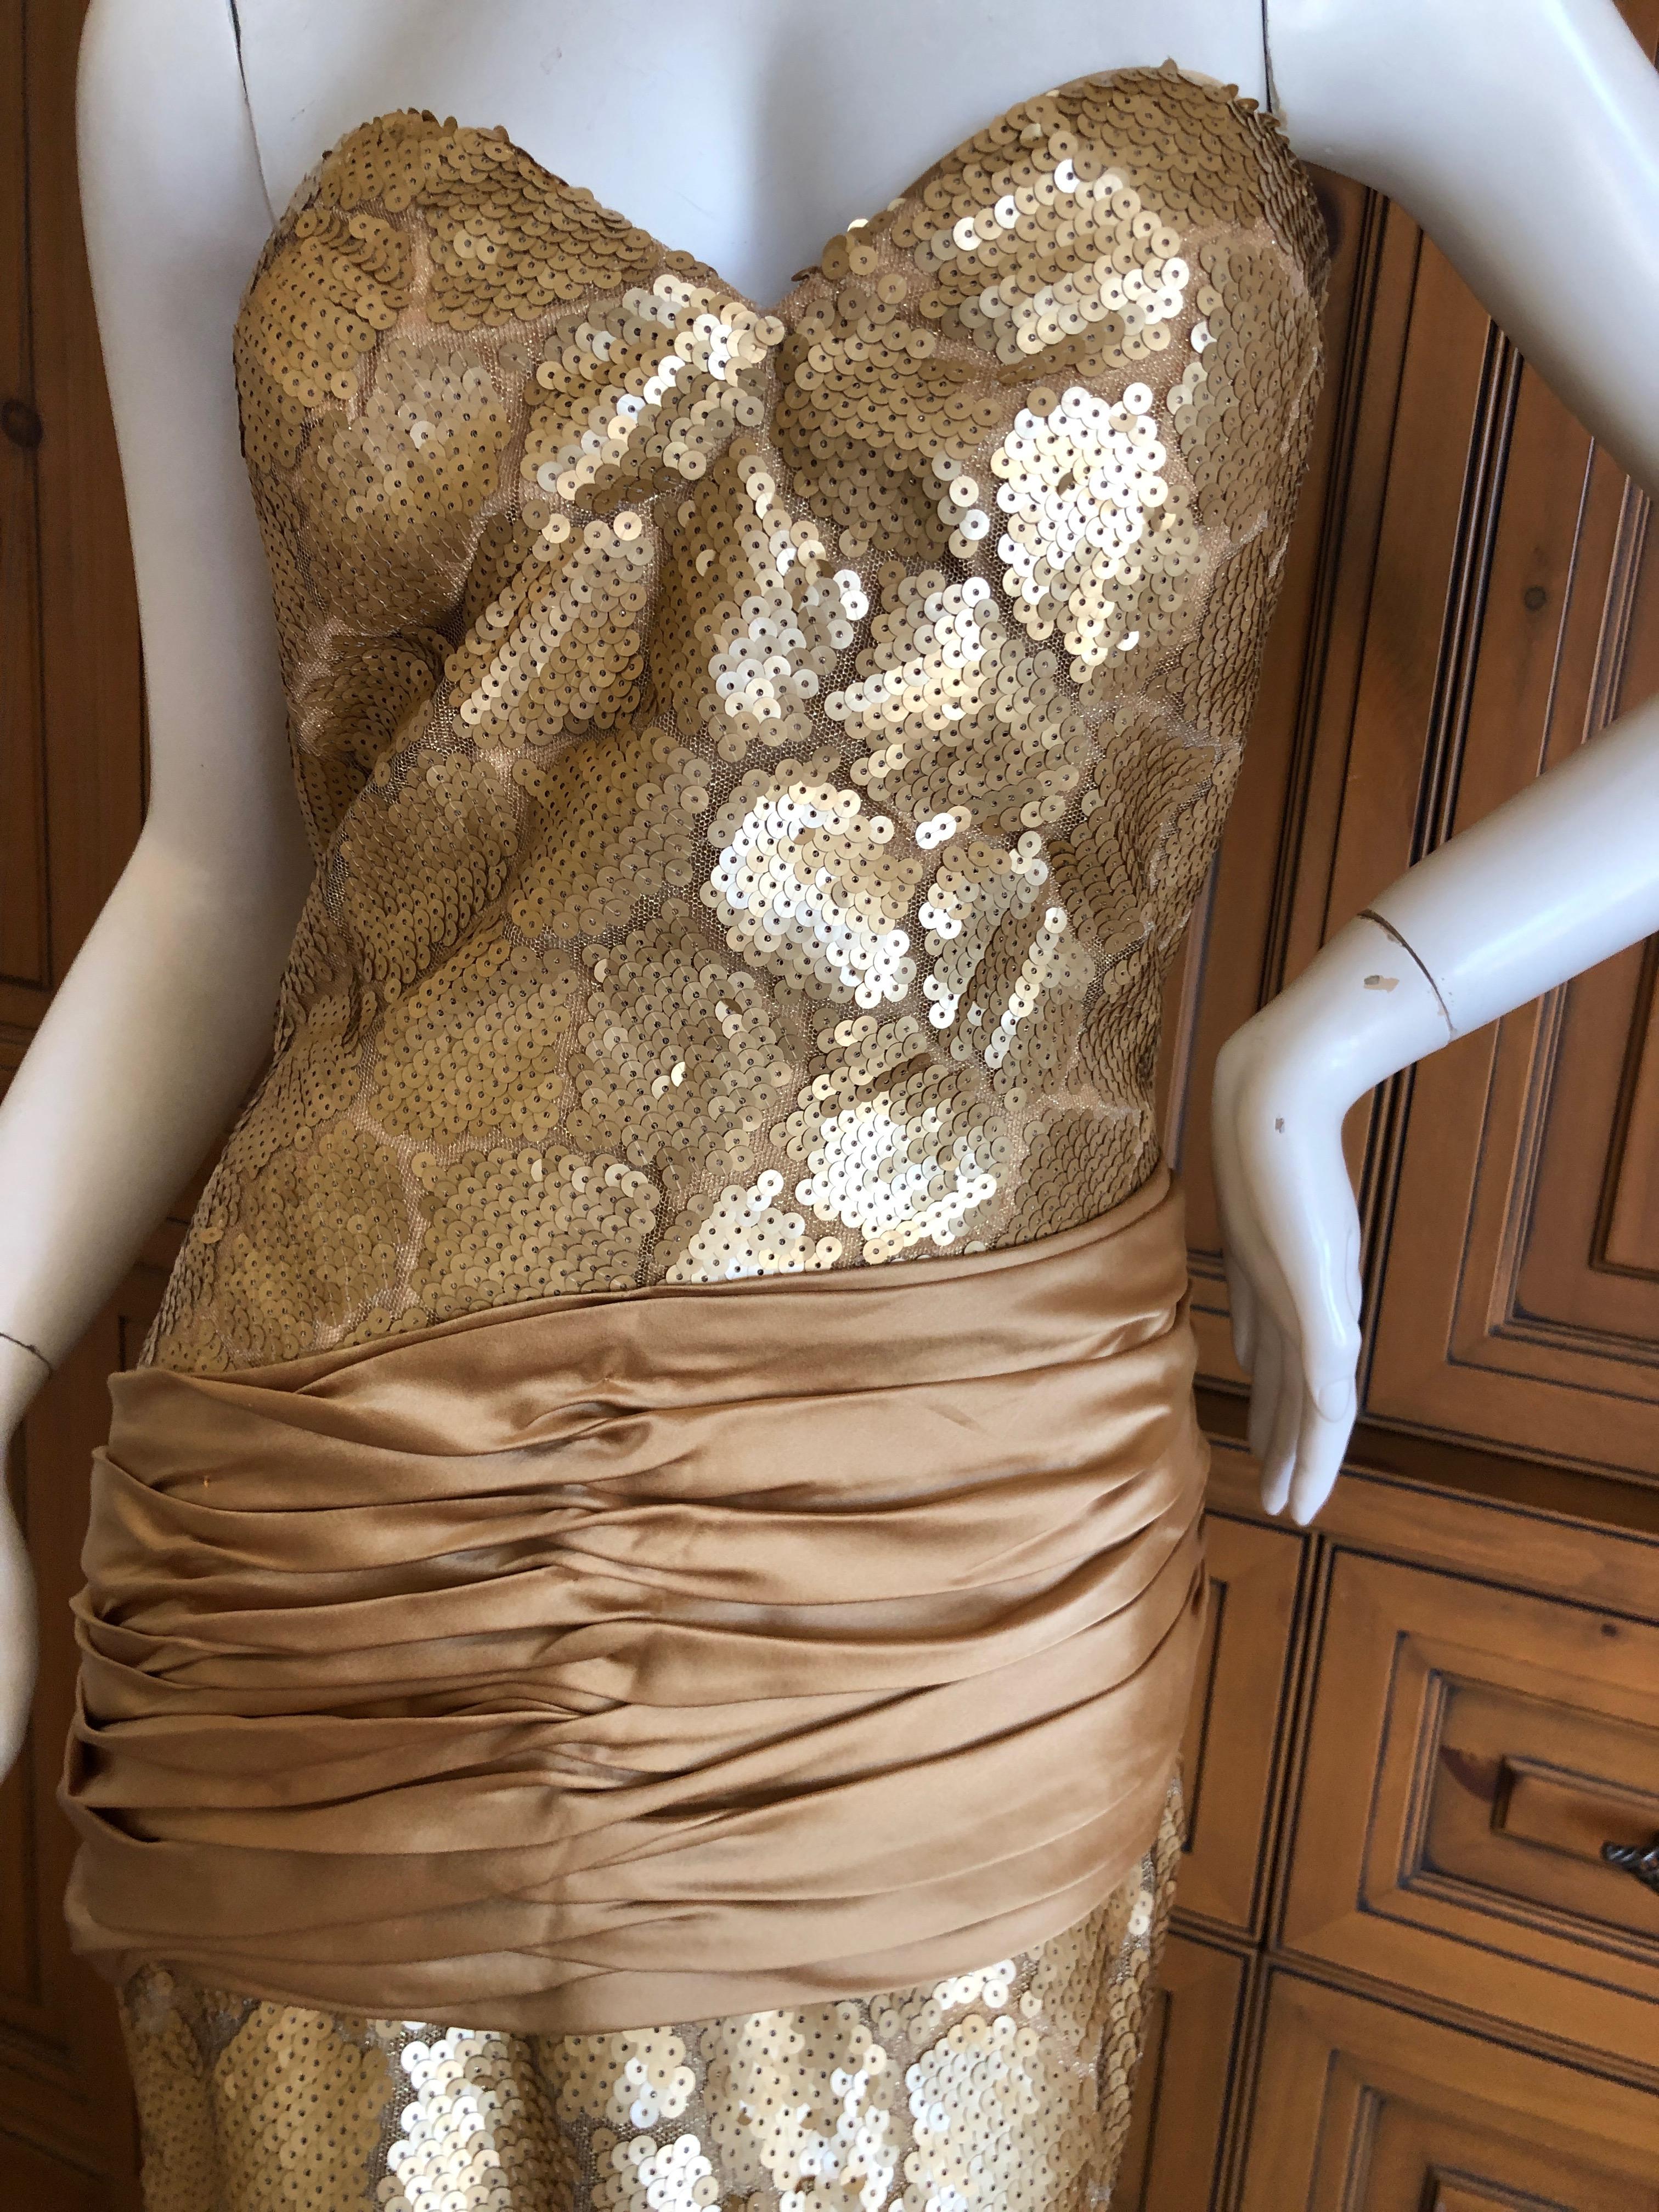 Loris Azzaro Couture 1970s Sequin Accented Gold Dress with Waist Sash Train In Excellent Condition For Sale In Cloverdale, CA